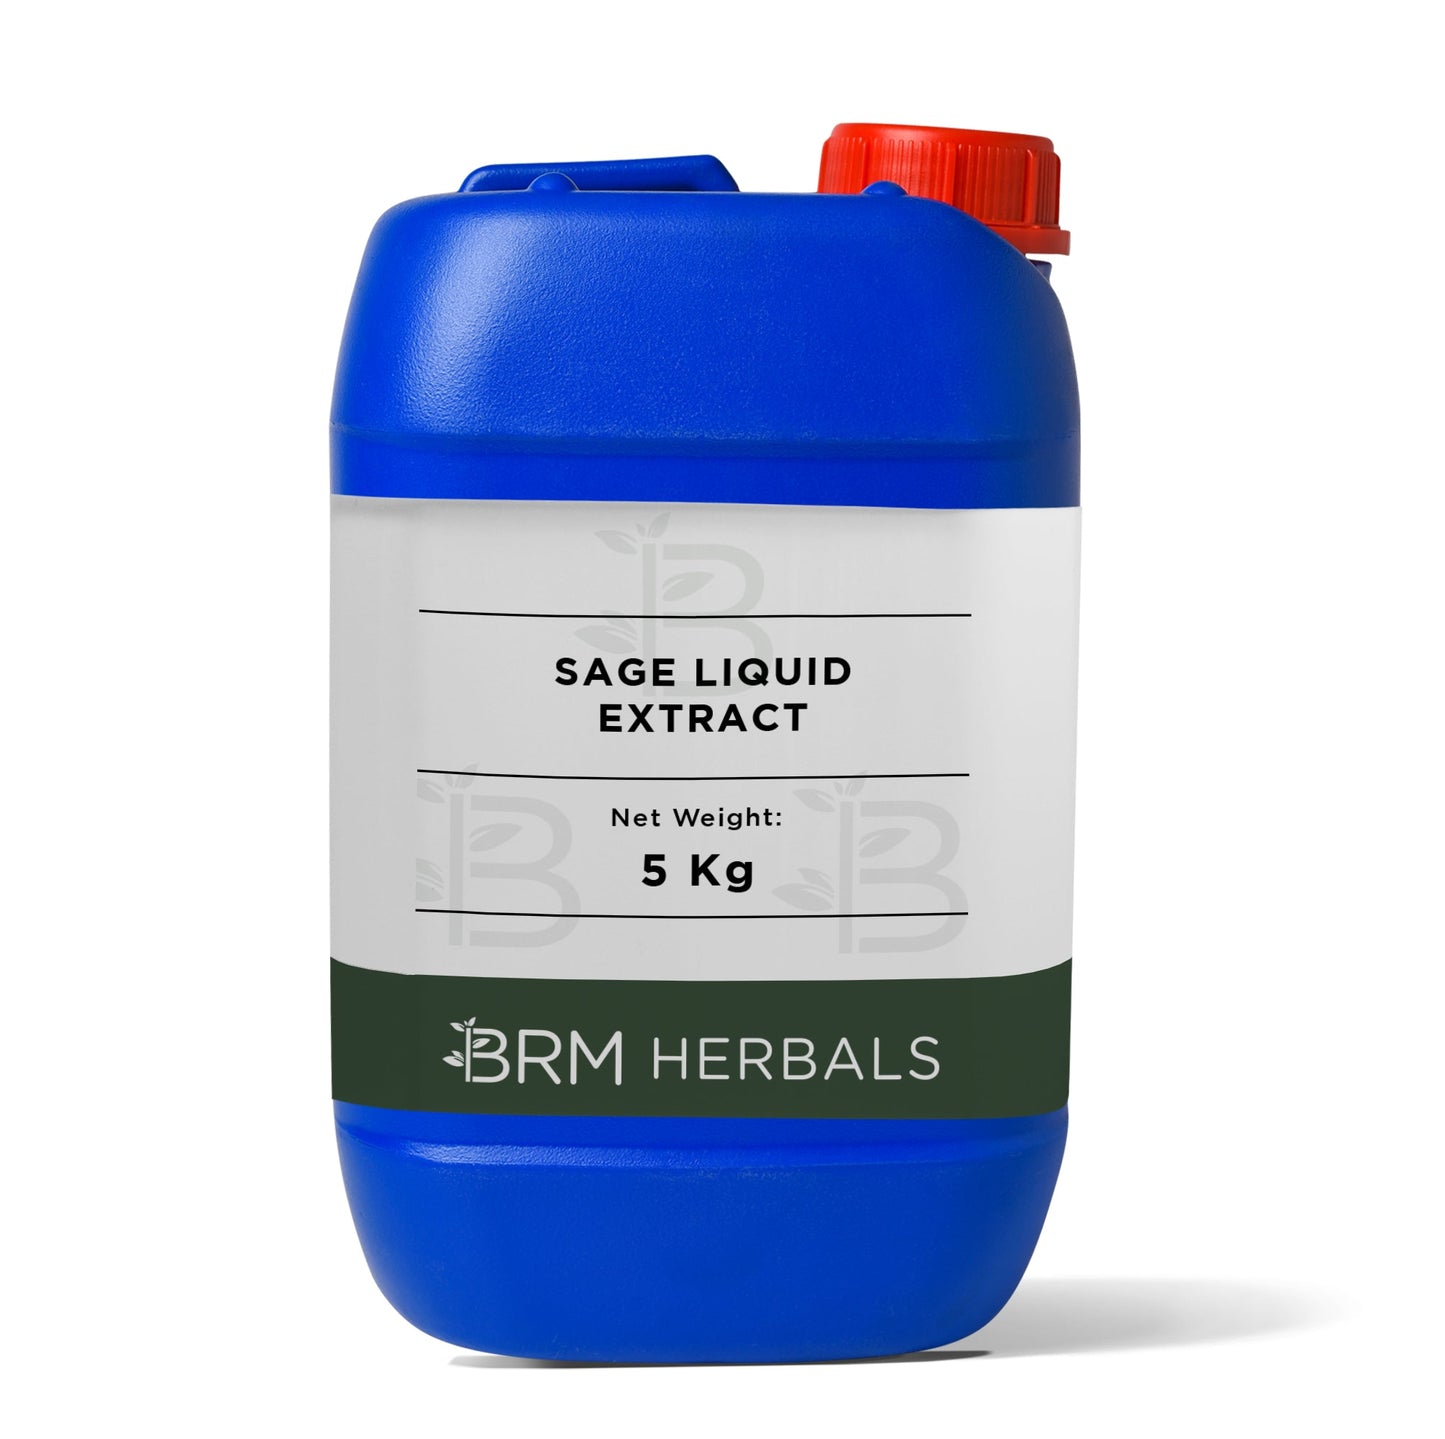 SAGE LIQUID EXTRACT - WATER SOLUBLE